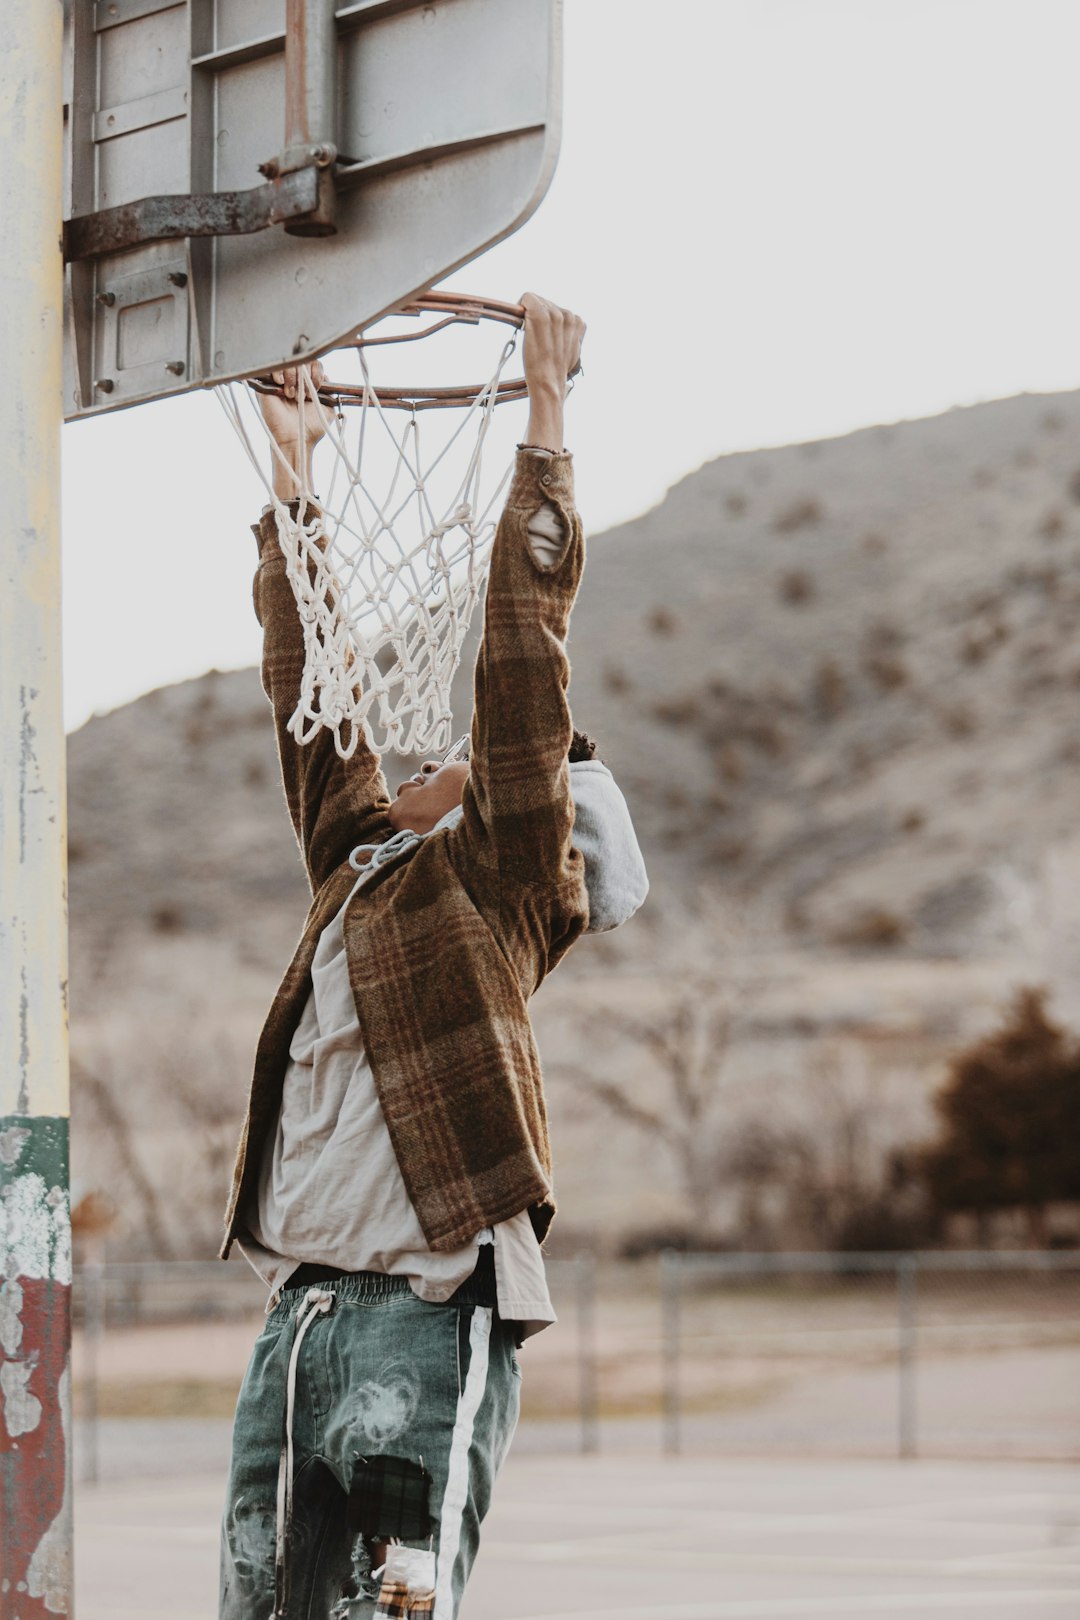 person in brown jacket playing basketball during daytime